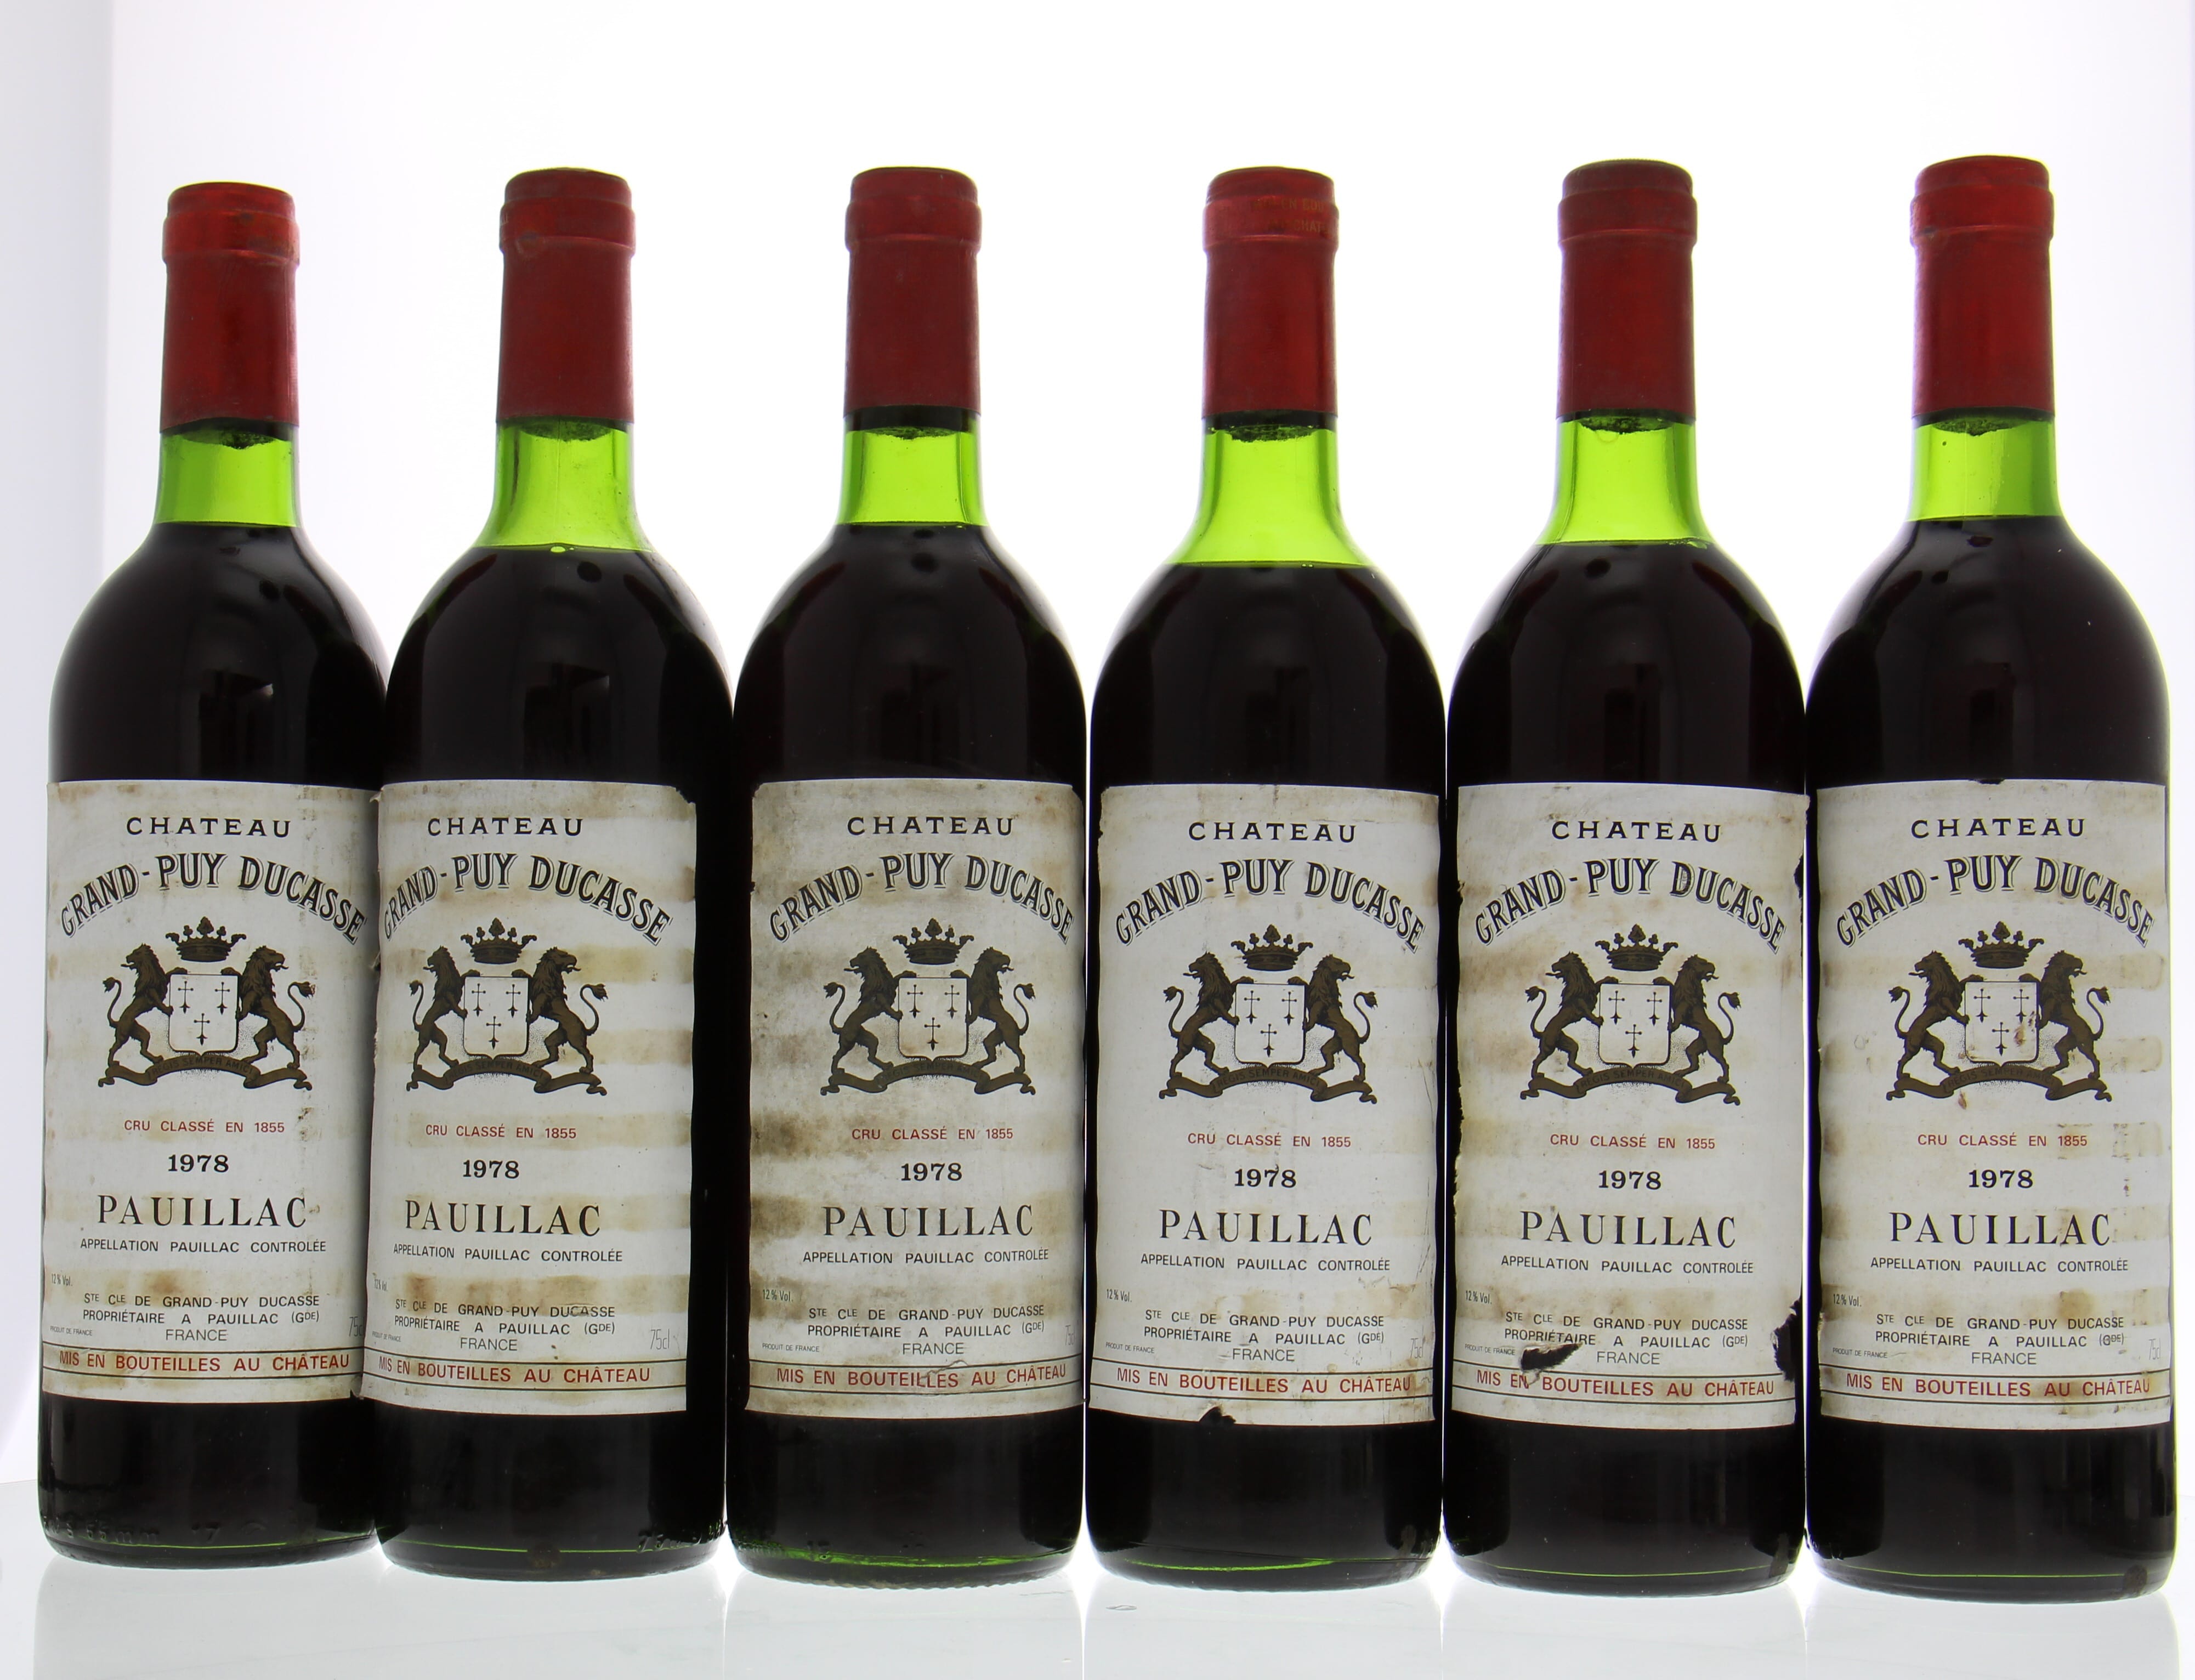 Chateau Grand Puy Ducasse - Chateau Grand Puy Ducasse 1978 Perfect